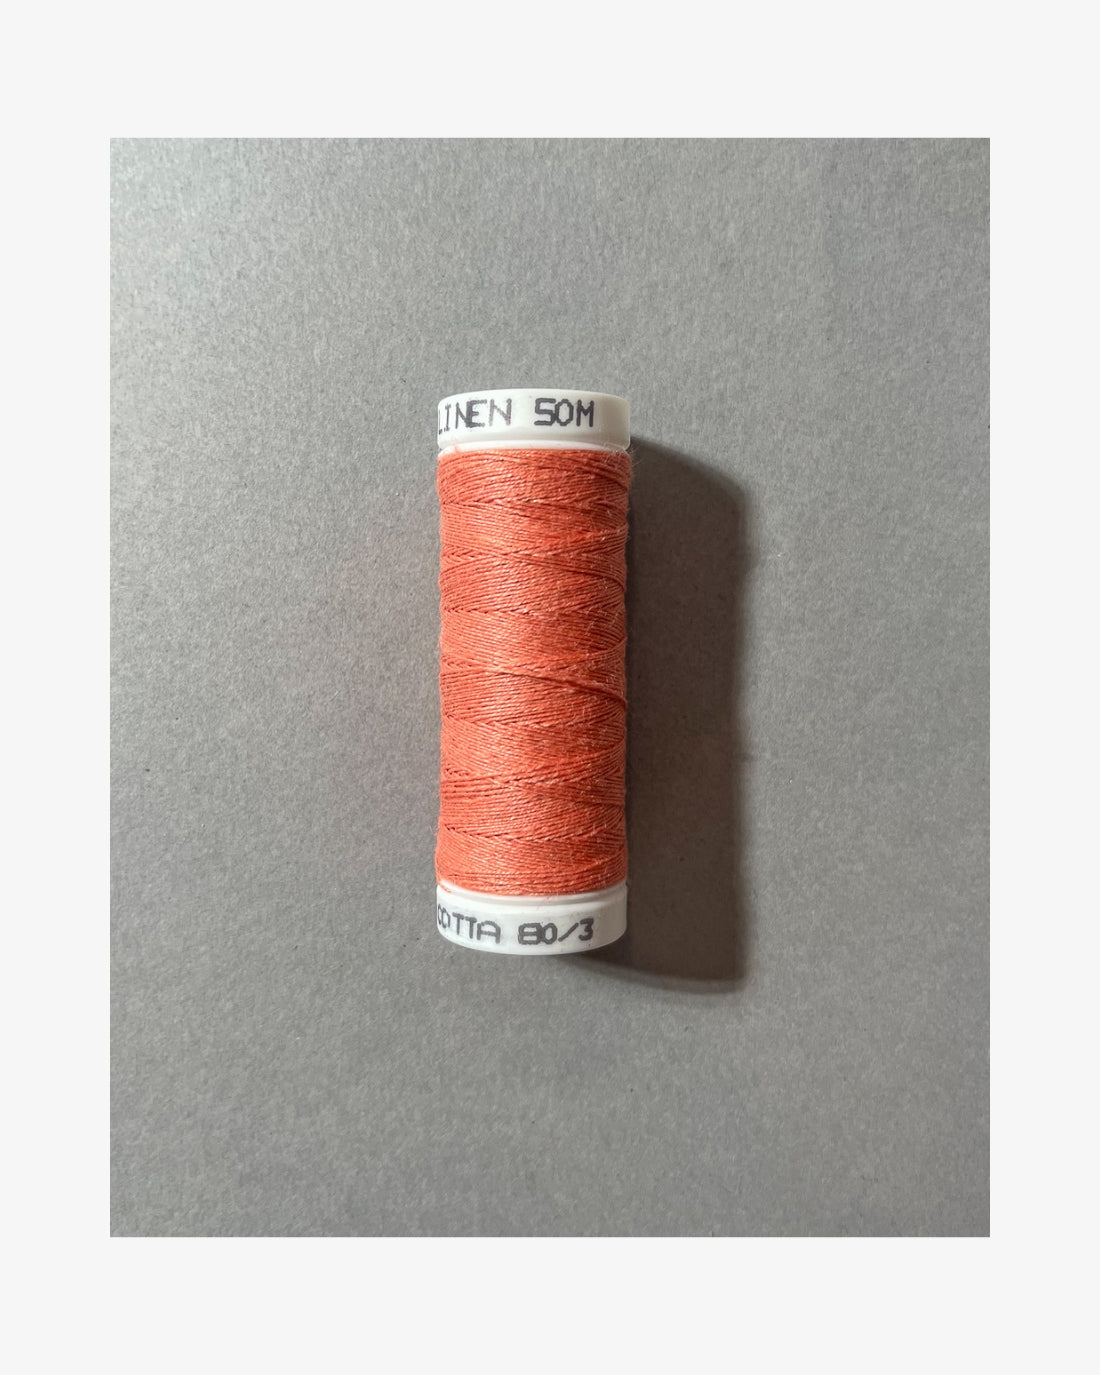 80/3 Linen Threads by Londonderry